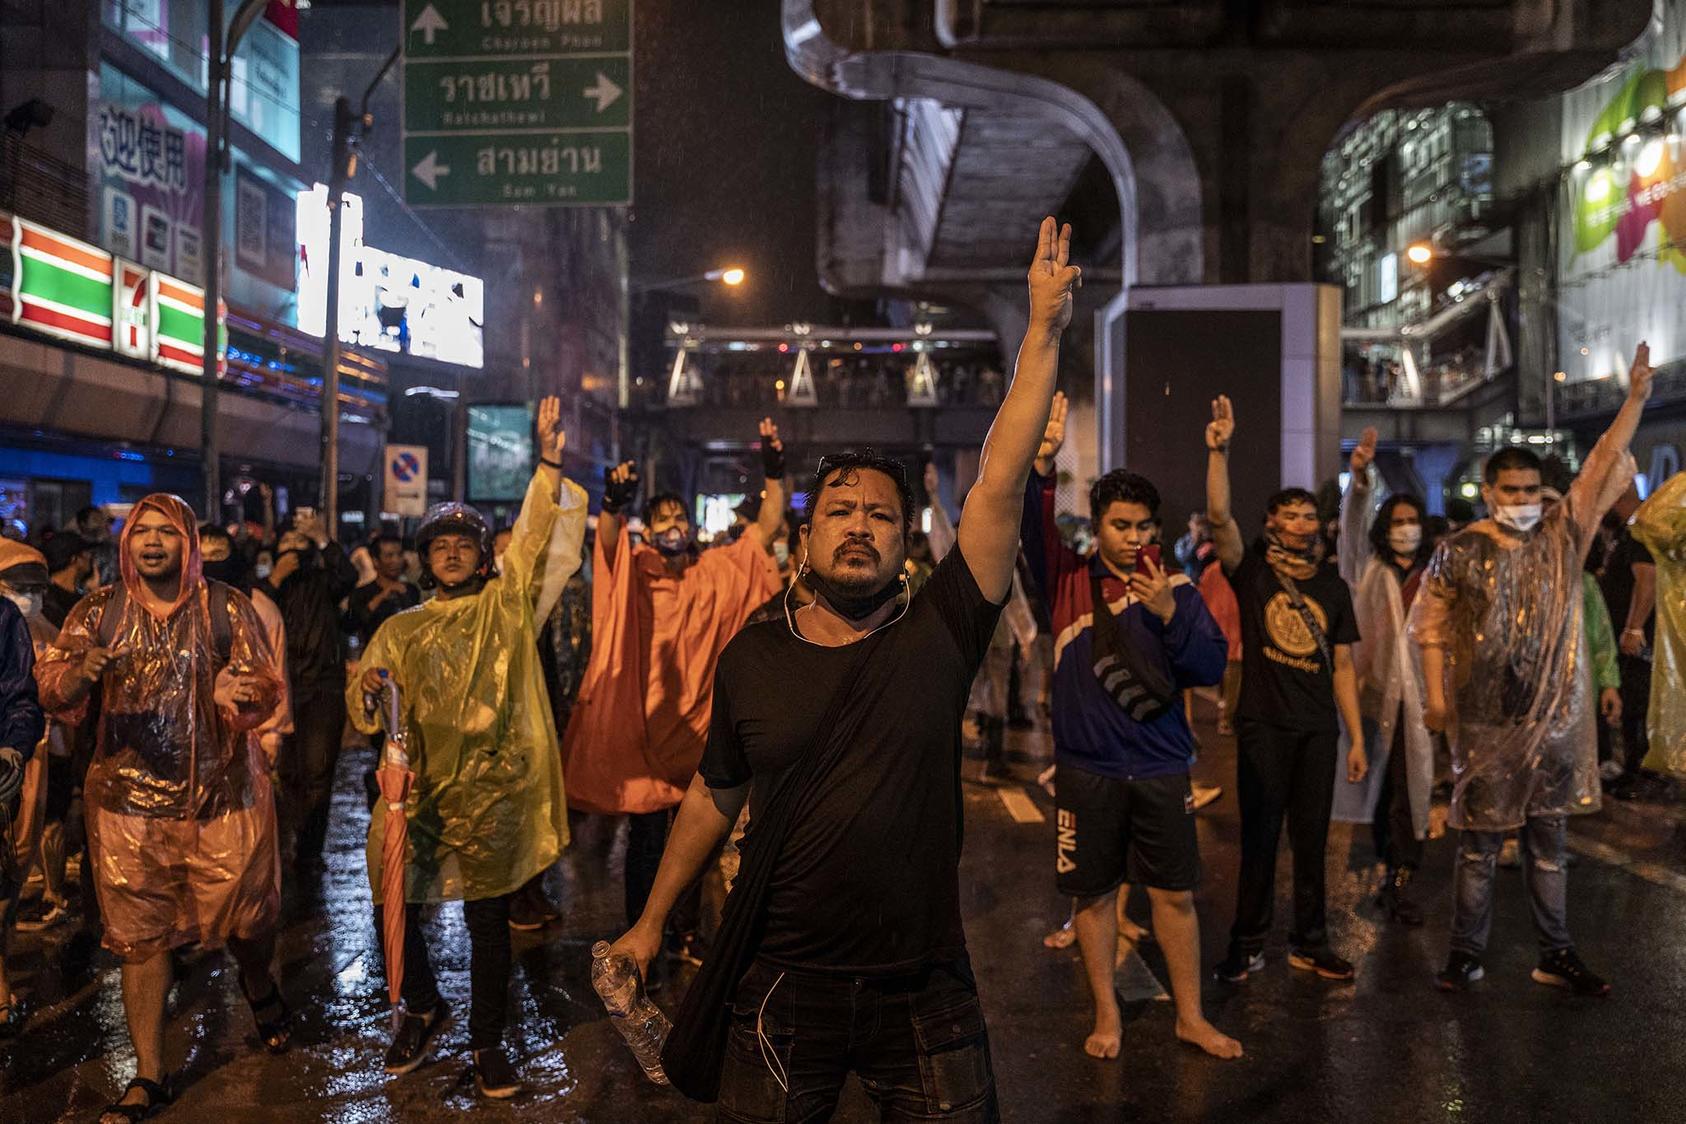 Protesters in Bangkok raise a three-finger salute, an anti-authoritarian gesture drawn from the popular “Hunger Games” franchise, Oct. 16, 2020. (Adam Dean/The New York Times)